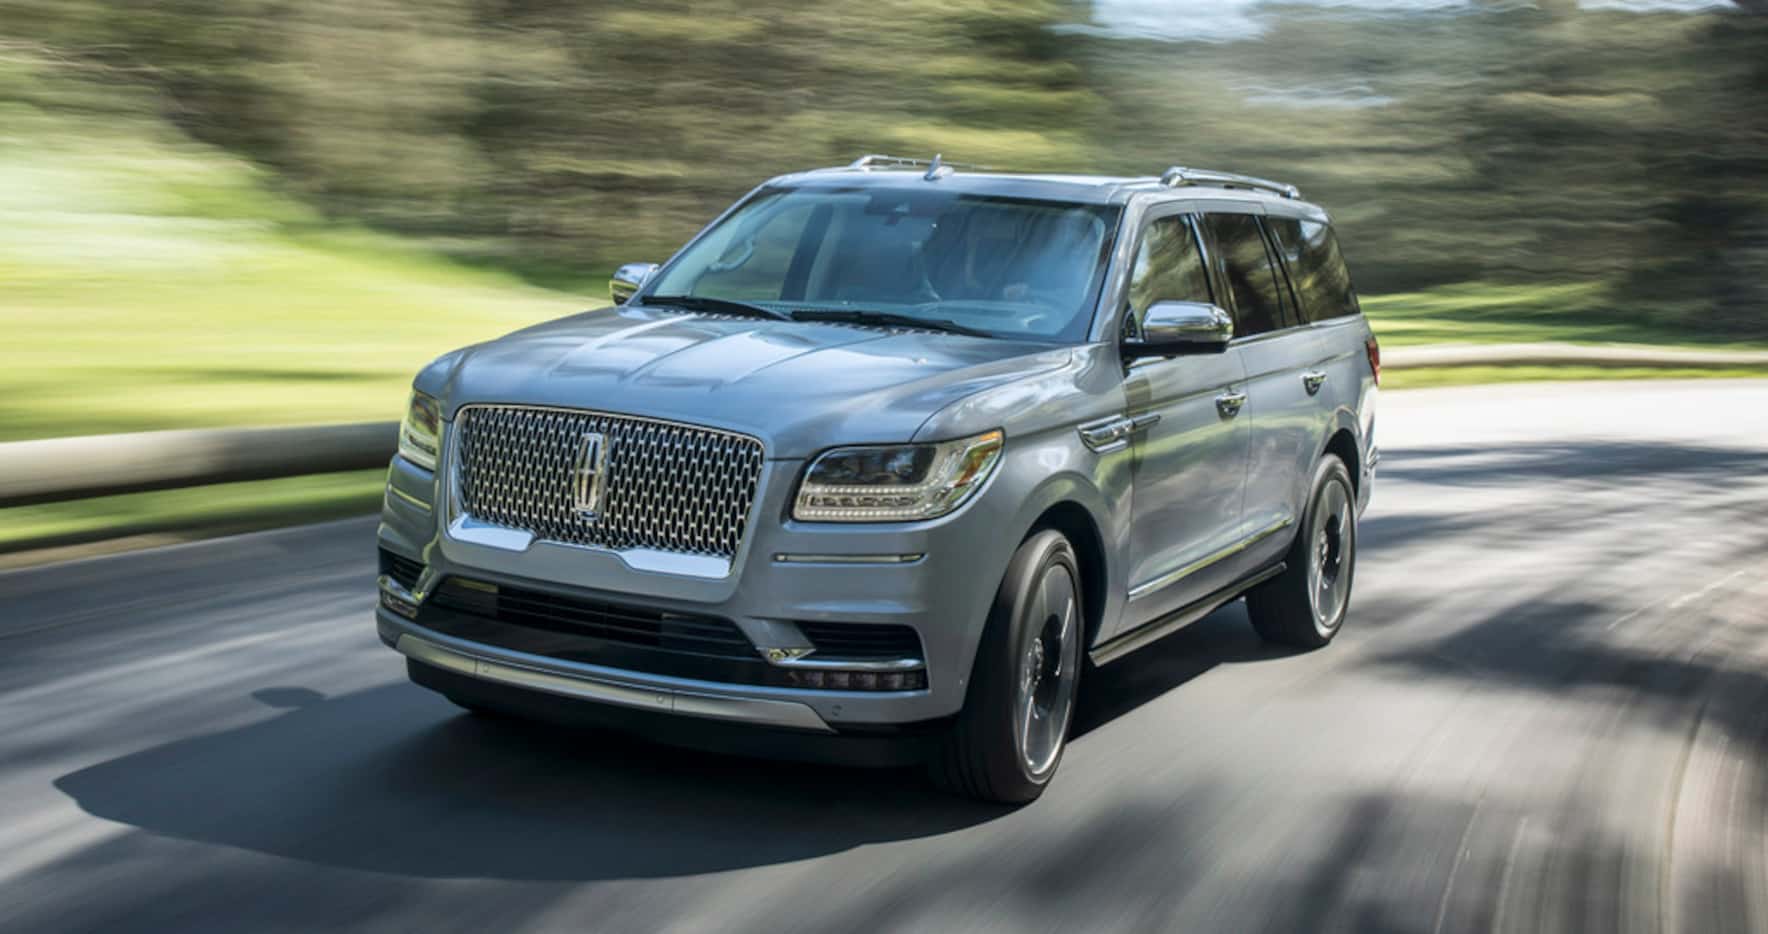 The 2018 Lincoln Navigator won the 2018 North American Truck of the Year award.